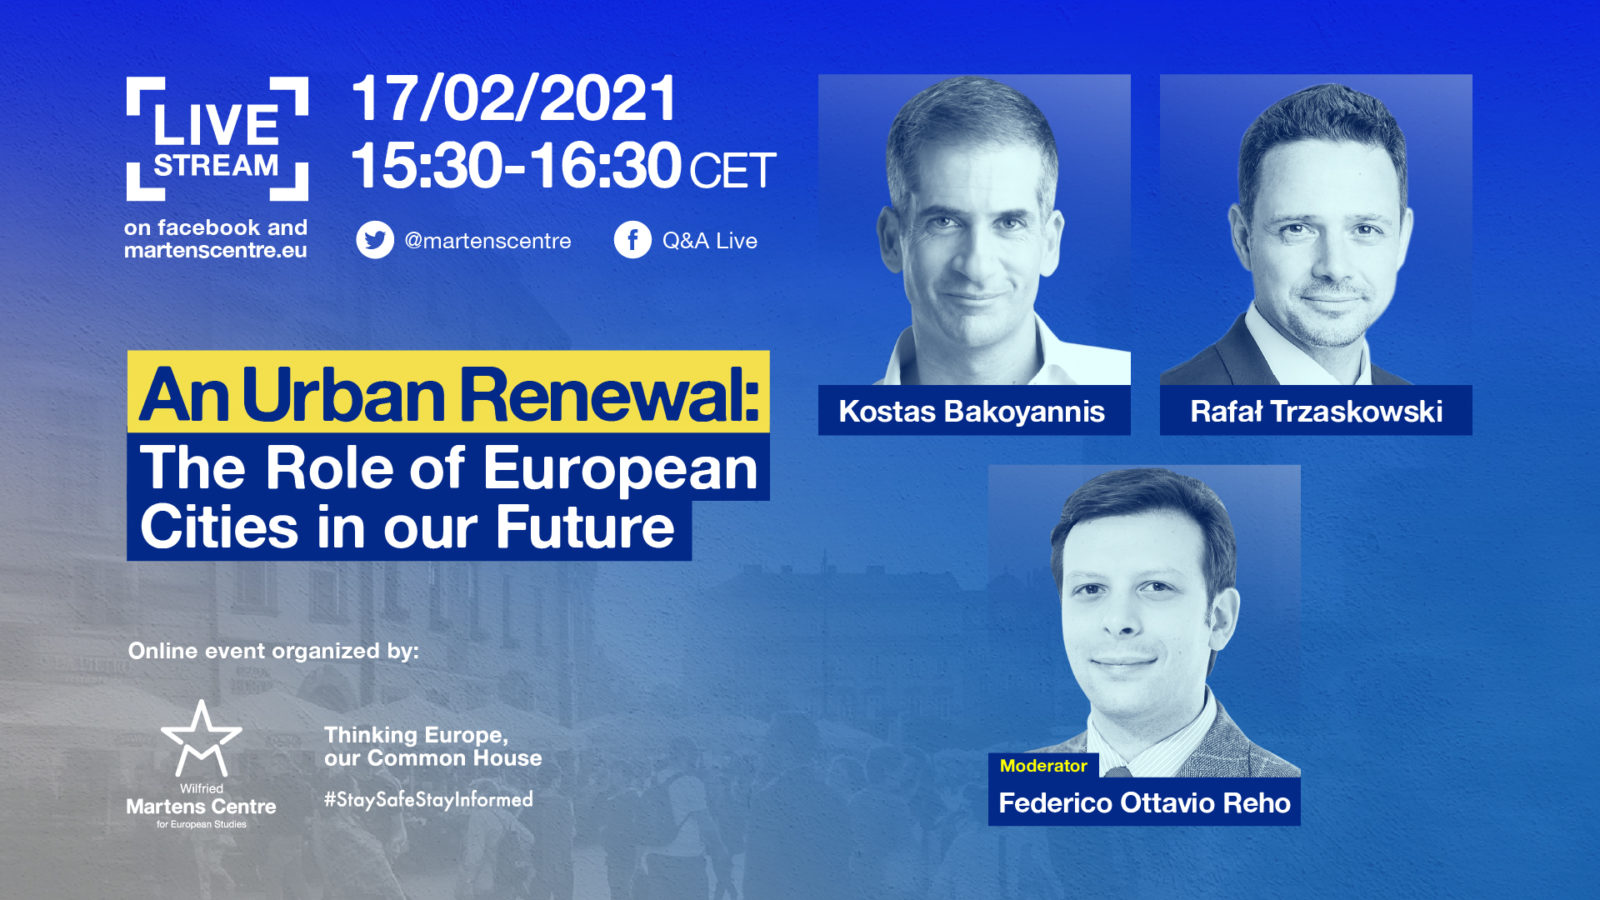 An Urban Renewal: The Role of European Cities in our Future